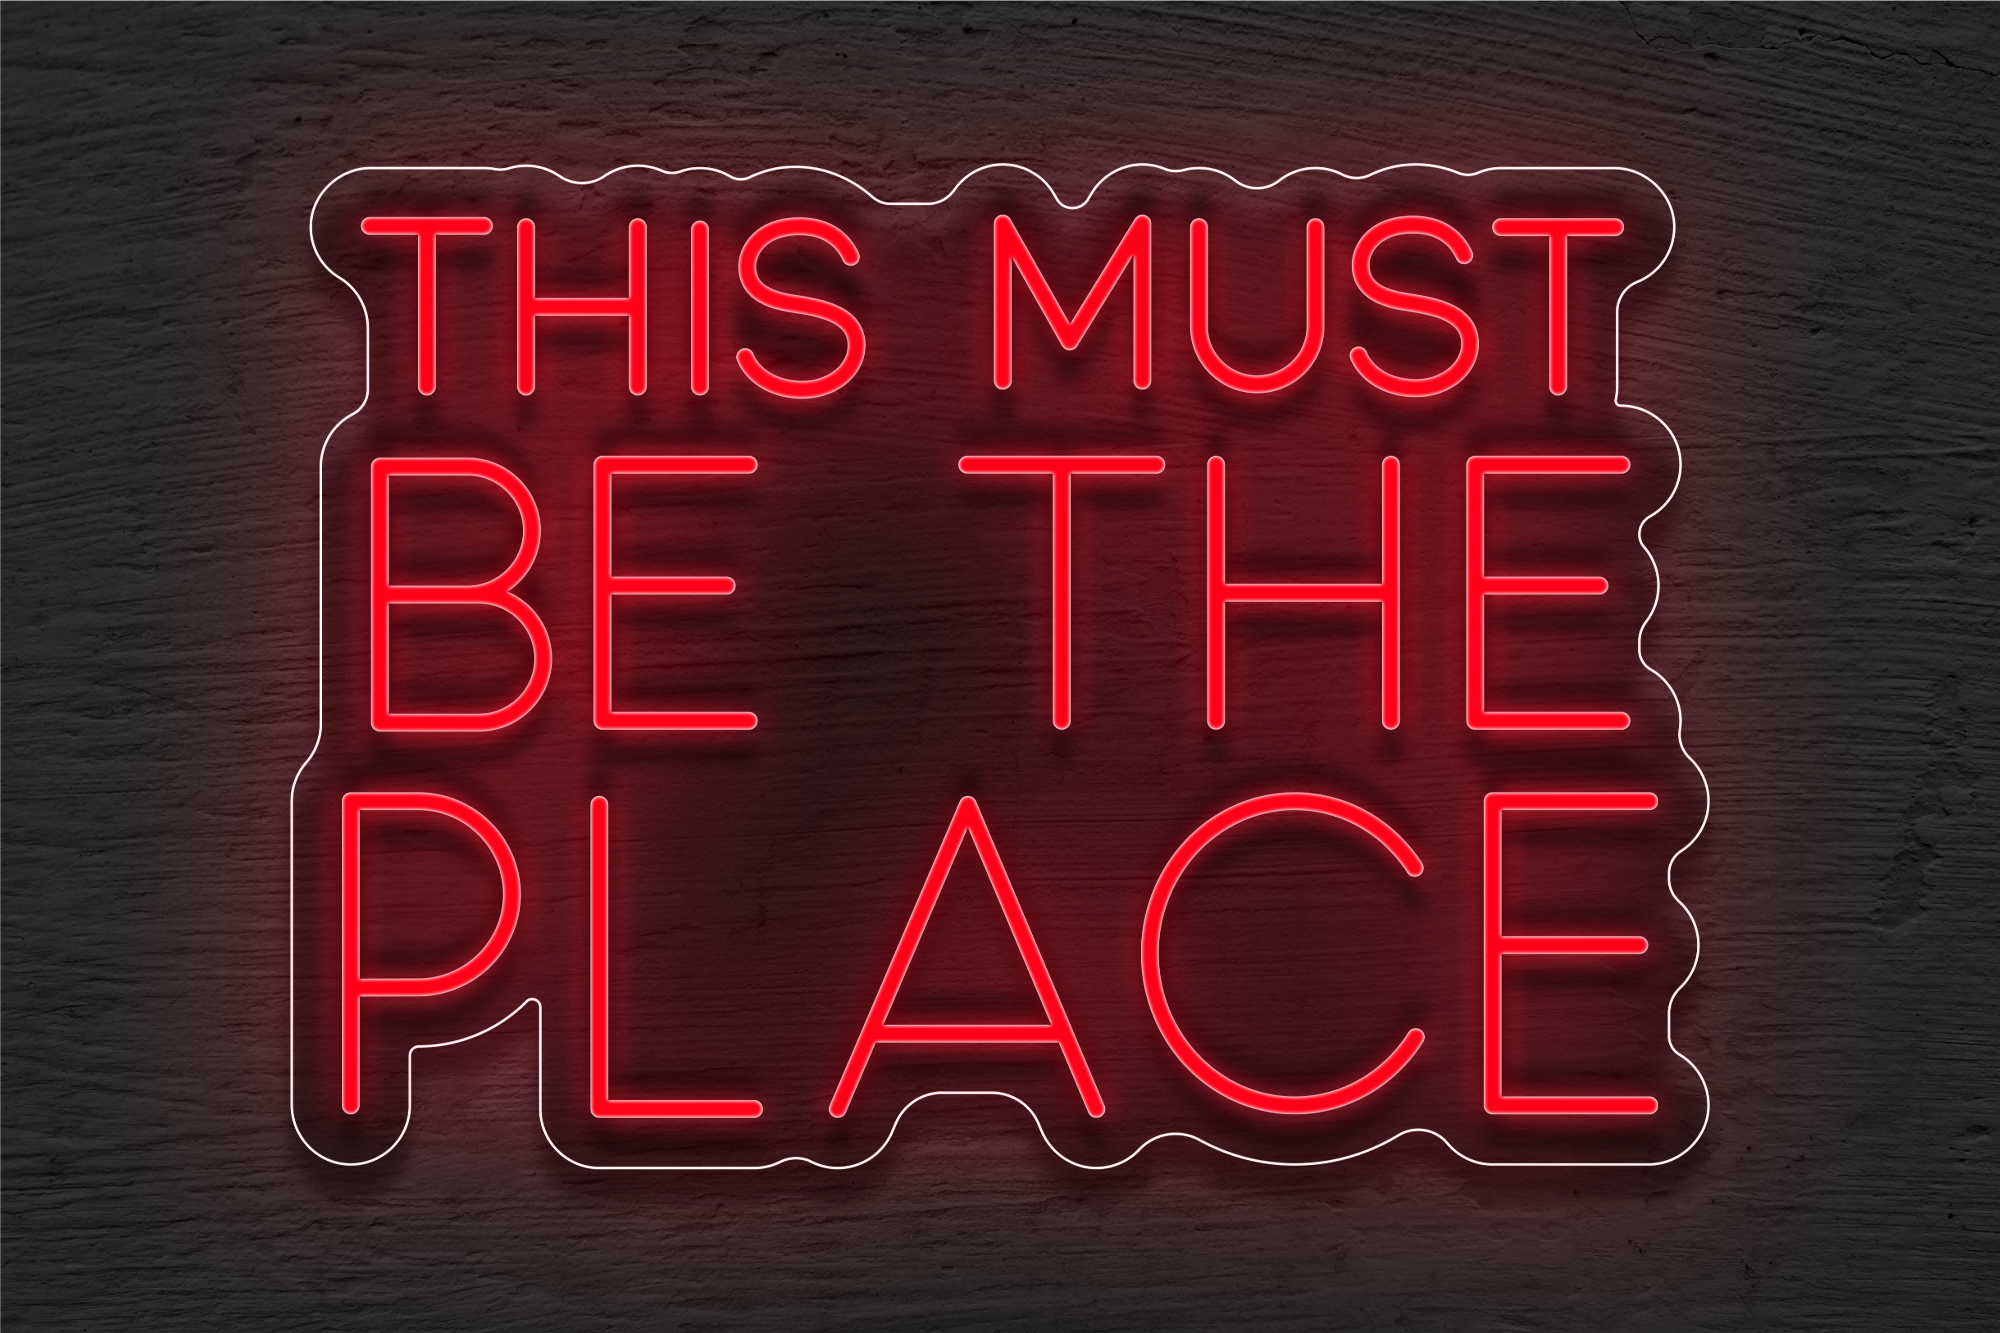 "This must be the Place" LED Neon Sign